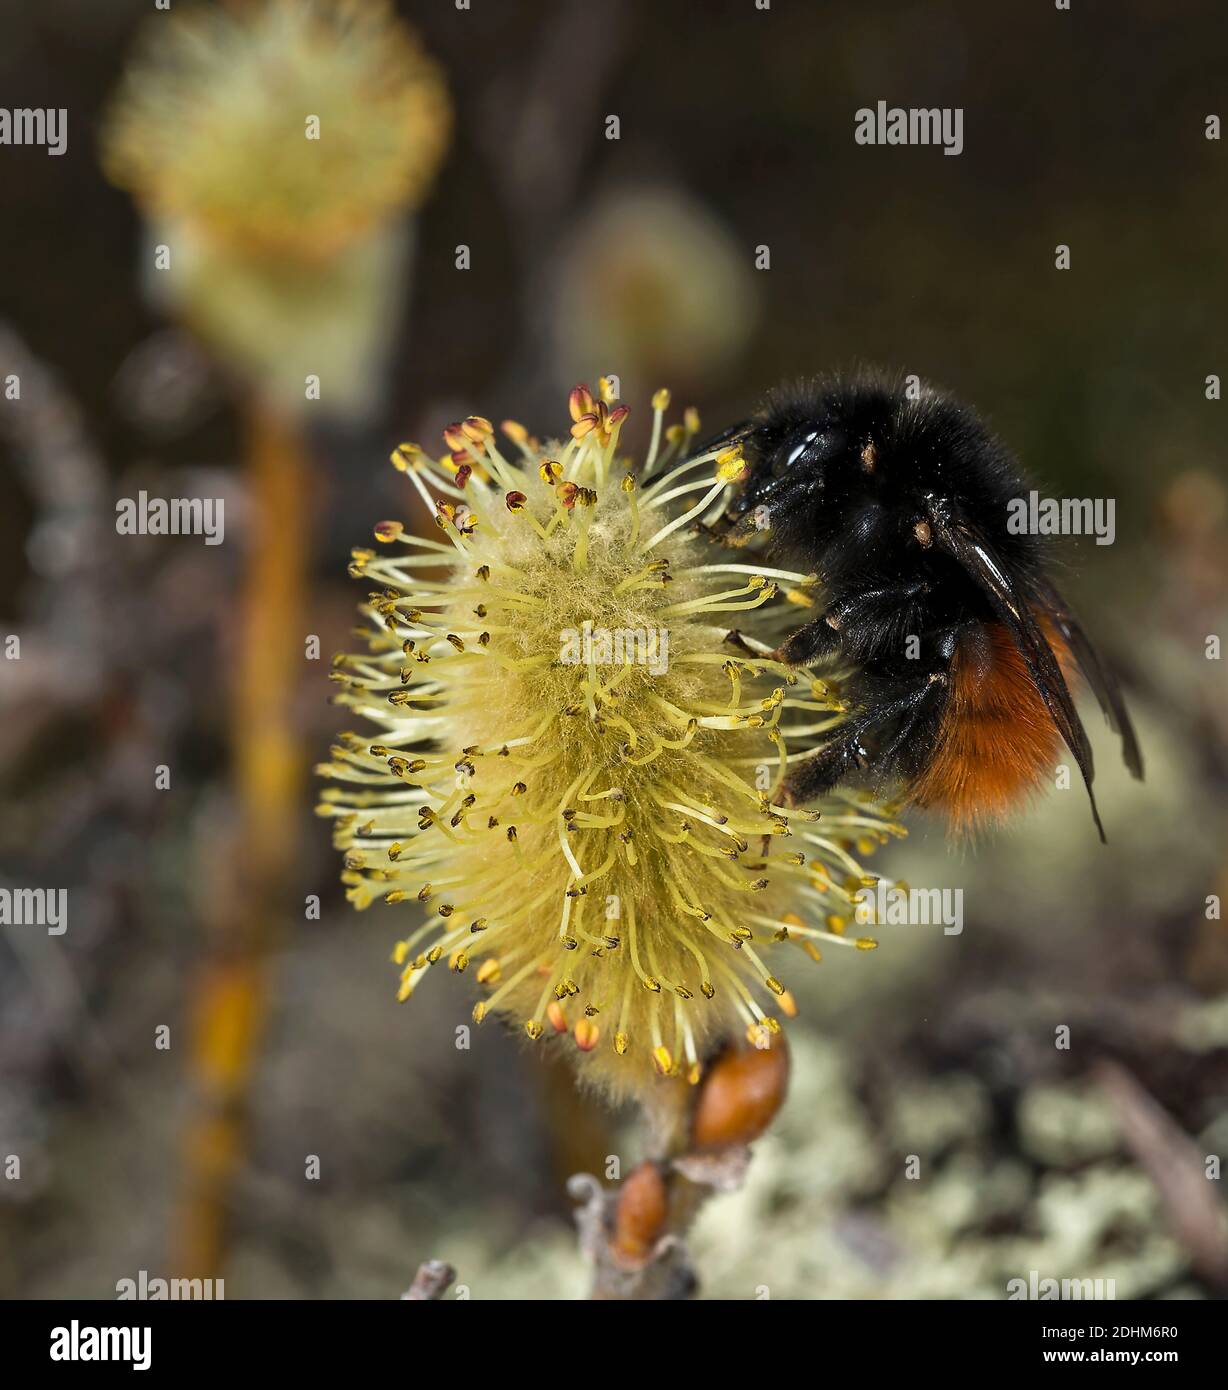 Quee of the bumblebee (Bombus lapponicus scandinavicus) with parasitic mites feeding on male Willov flower at Dyranut, Hardangervidda southern Norway Stock Photo